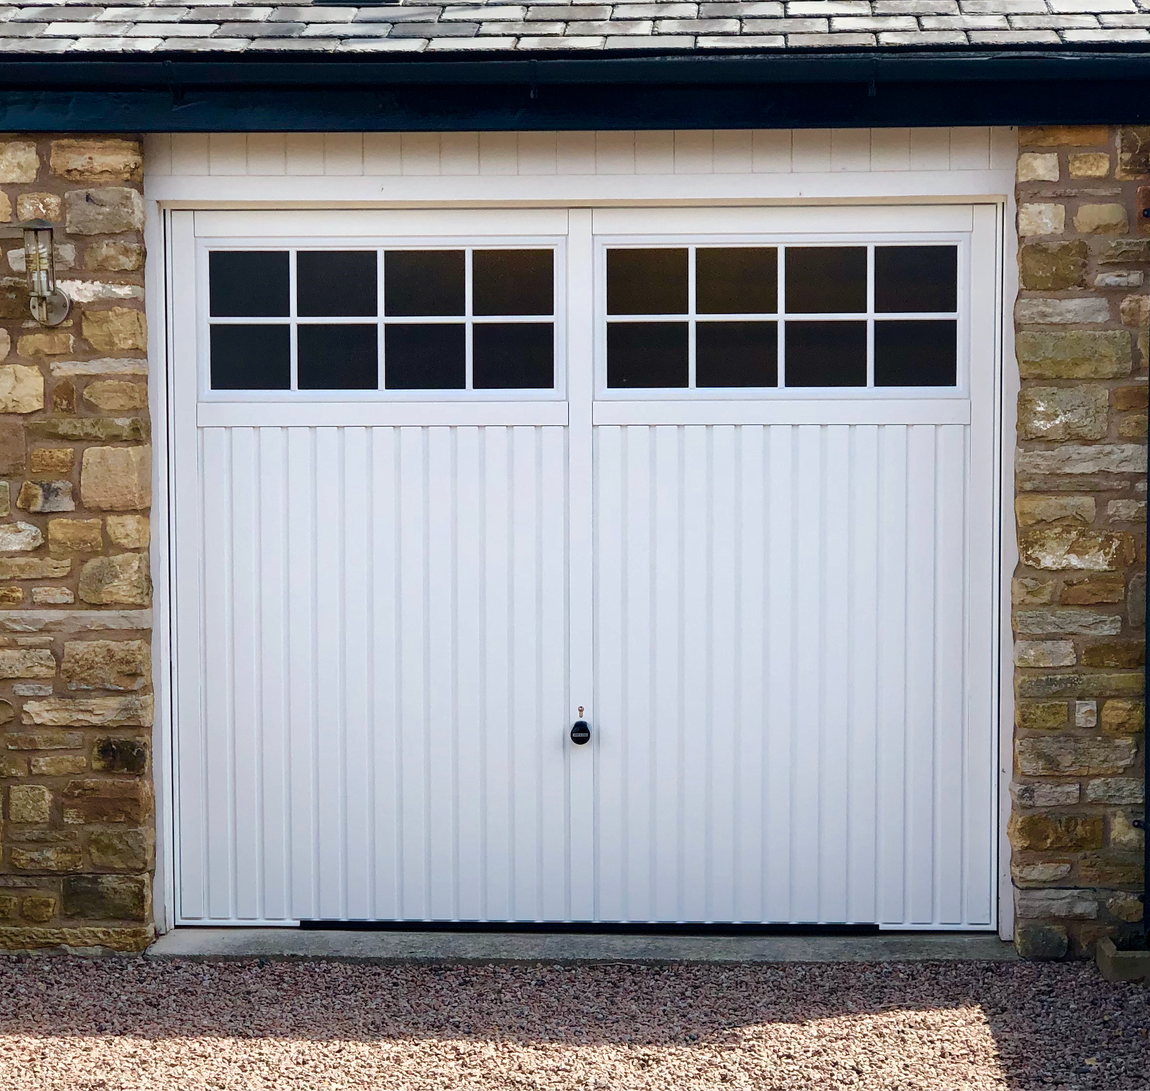 We provide doors for different kinds of property